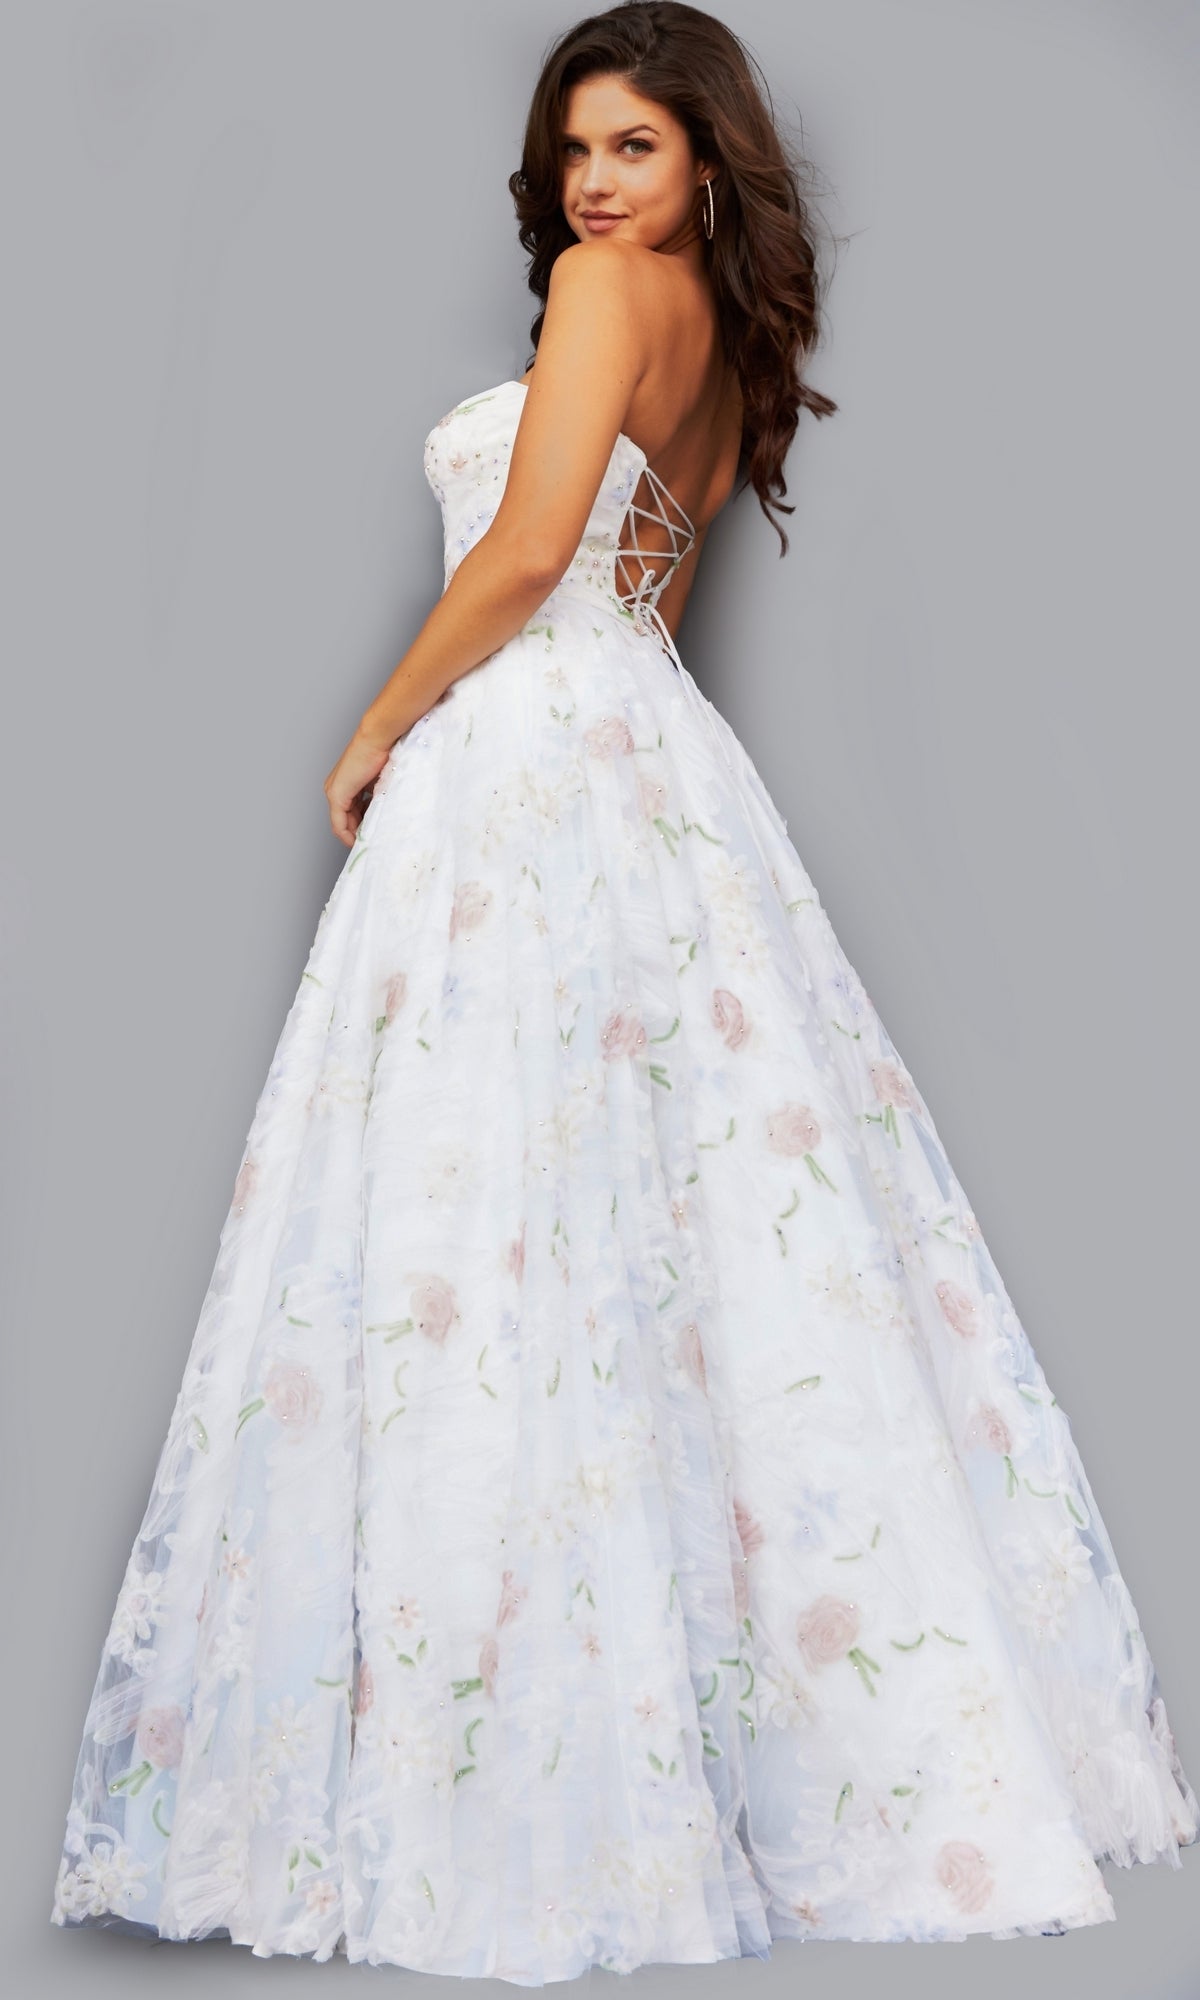 Floral-Print White Ball Gown 07966 by Jovani